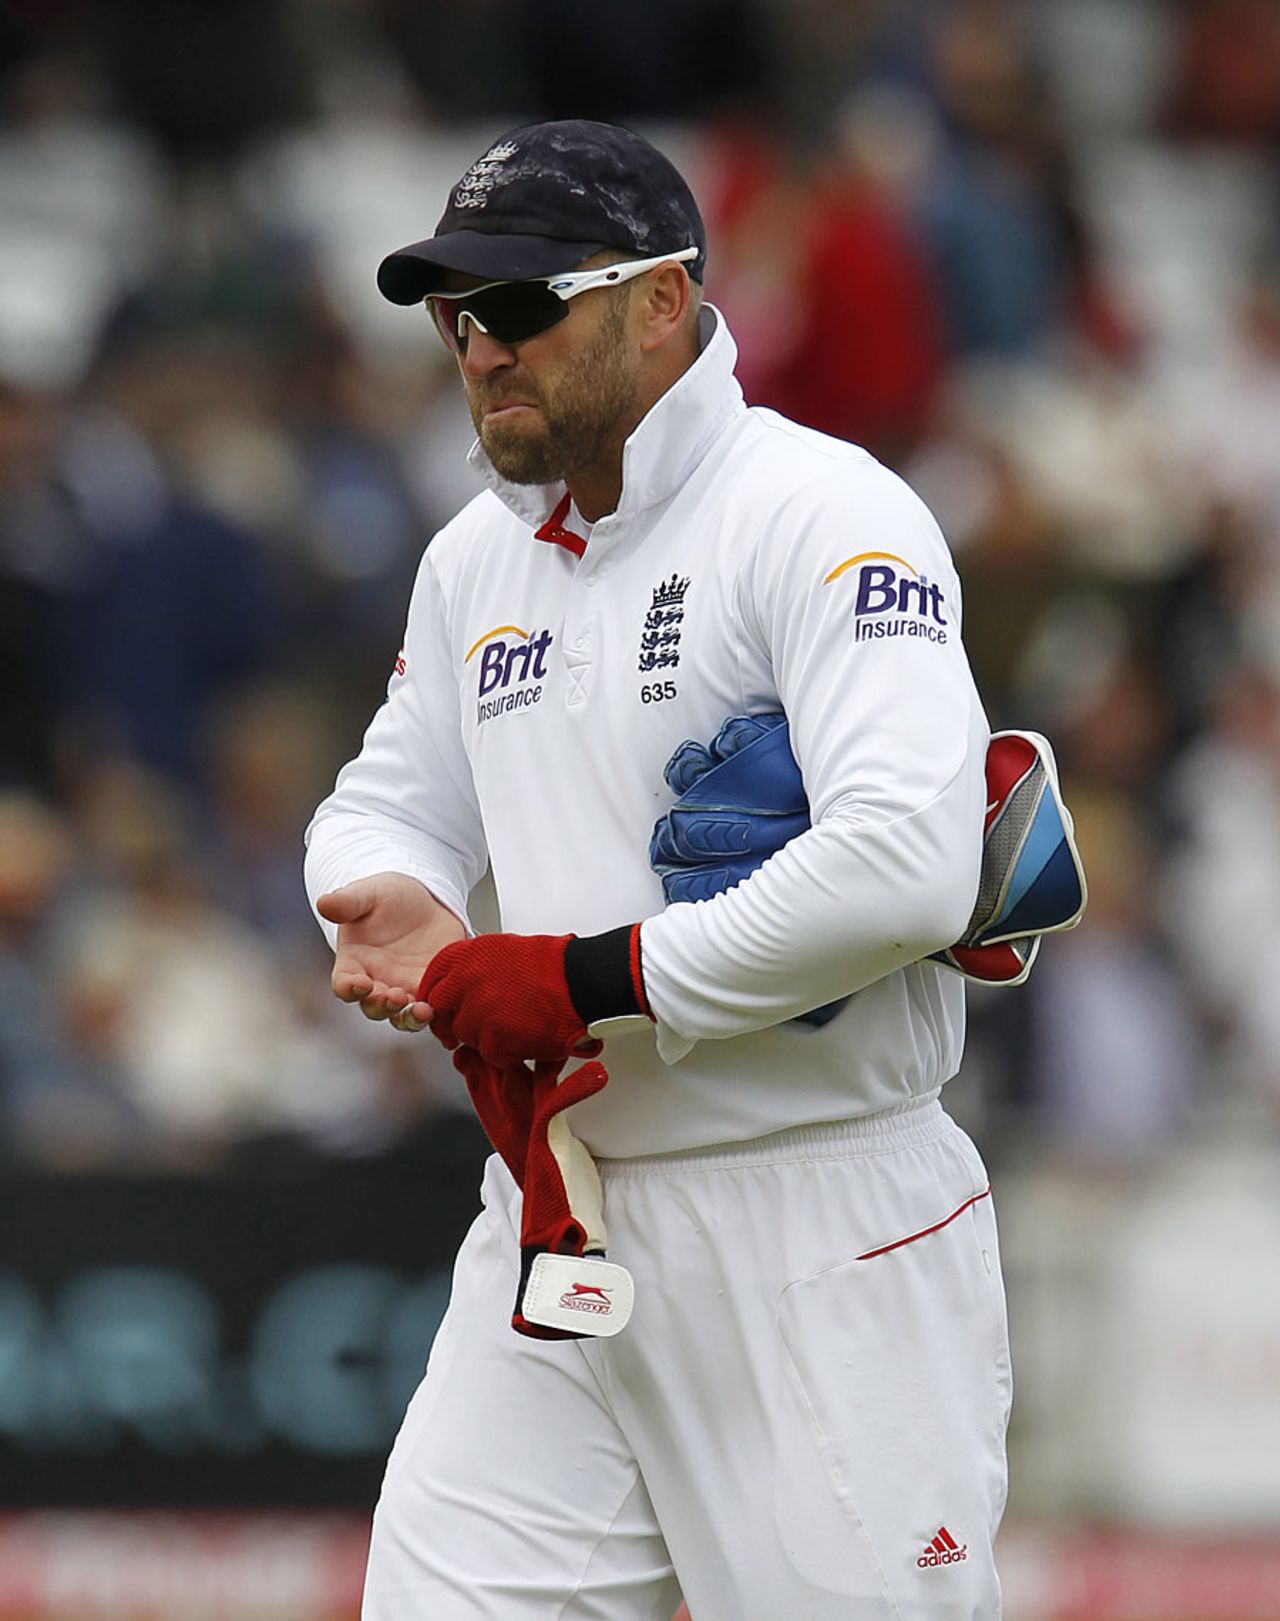 It was a tricky day for Matt Prior on and off the field, England v Sri Lanka, 2nd Test, Lord's, 5th day, June 7, 2011